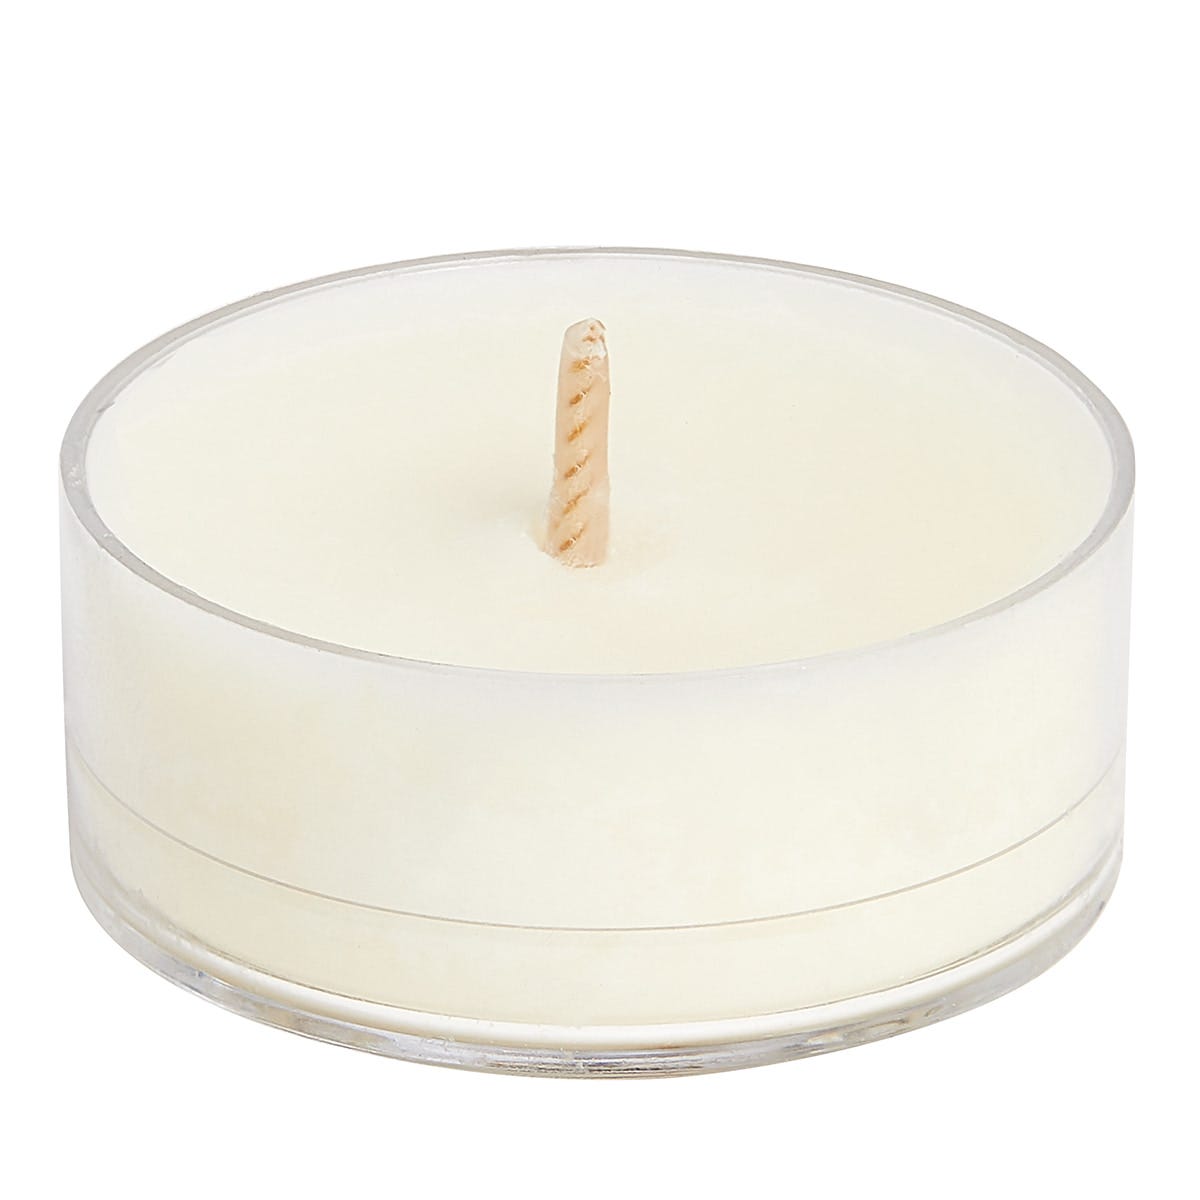 Be Centered Cedarwood + Vanilla 100% Soy Tealight Candles - PartyLite US